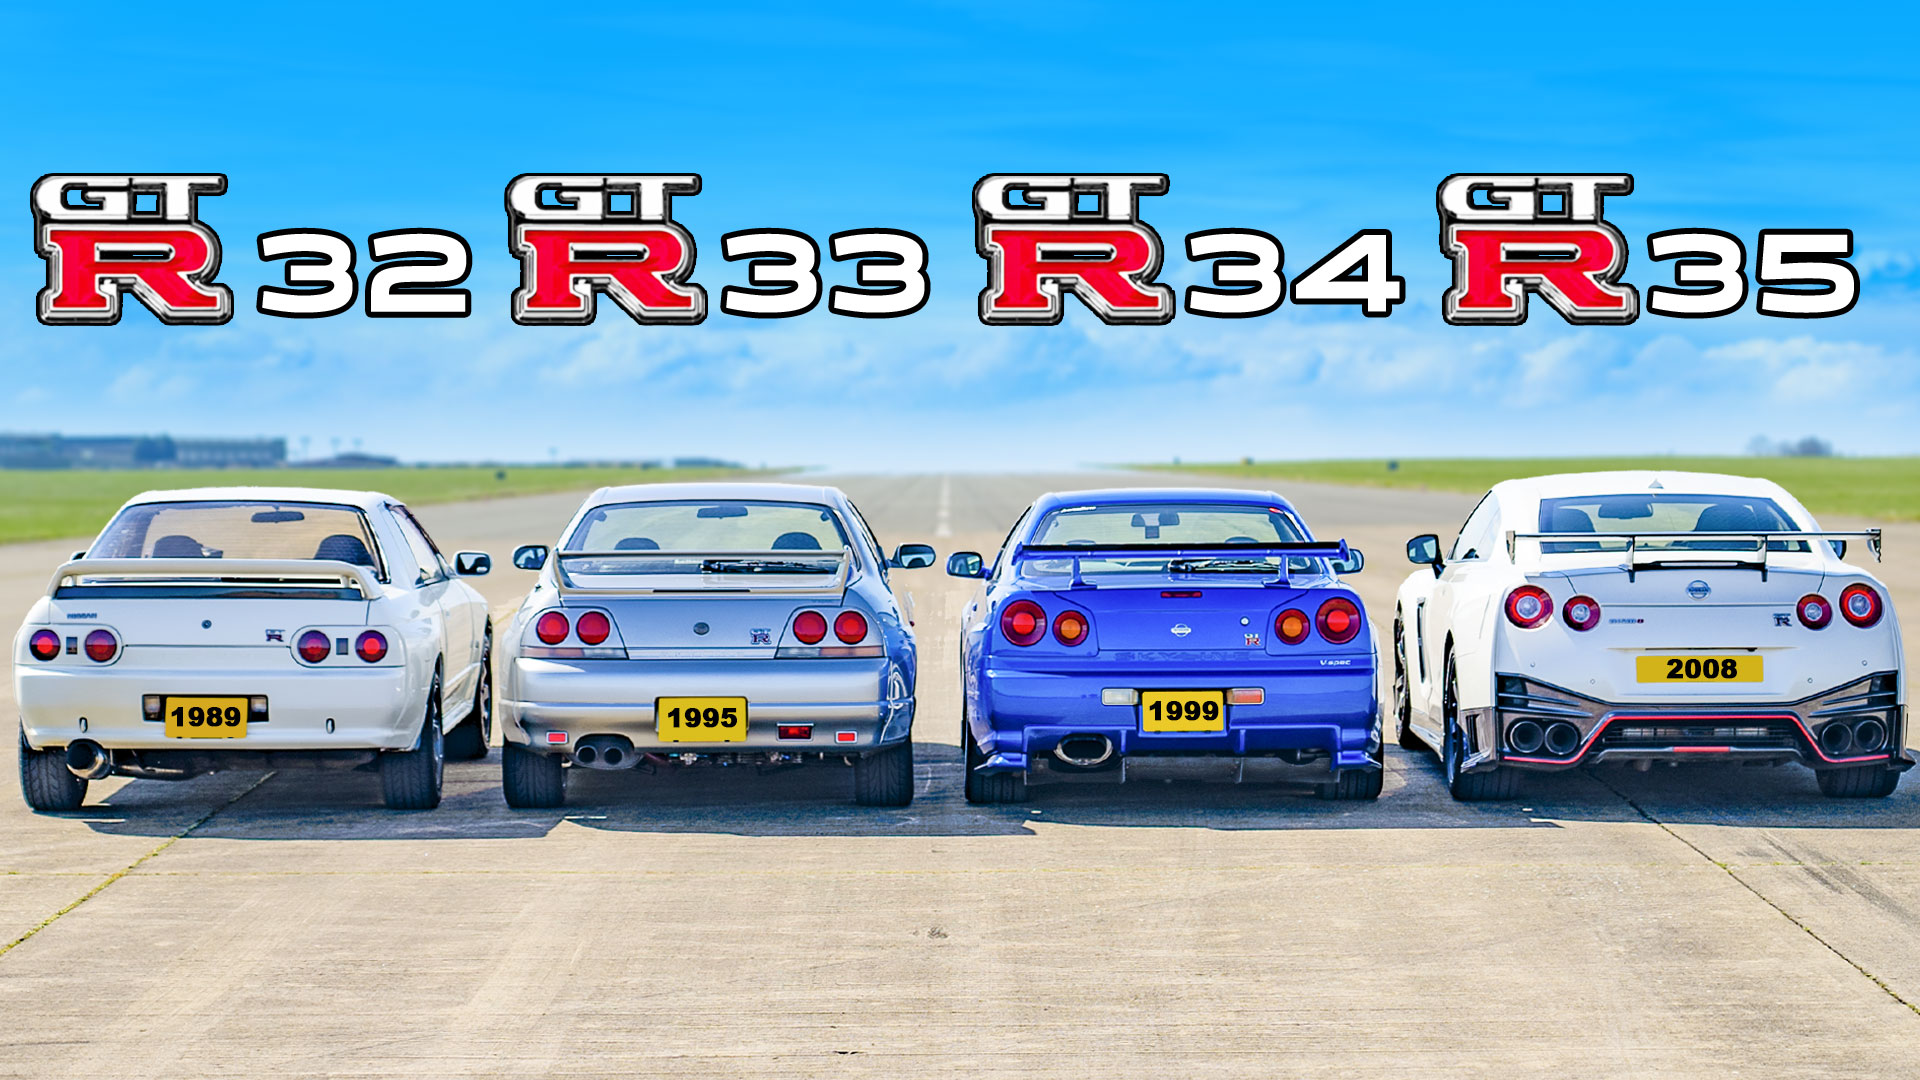 Why is R34 better than R33?